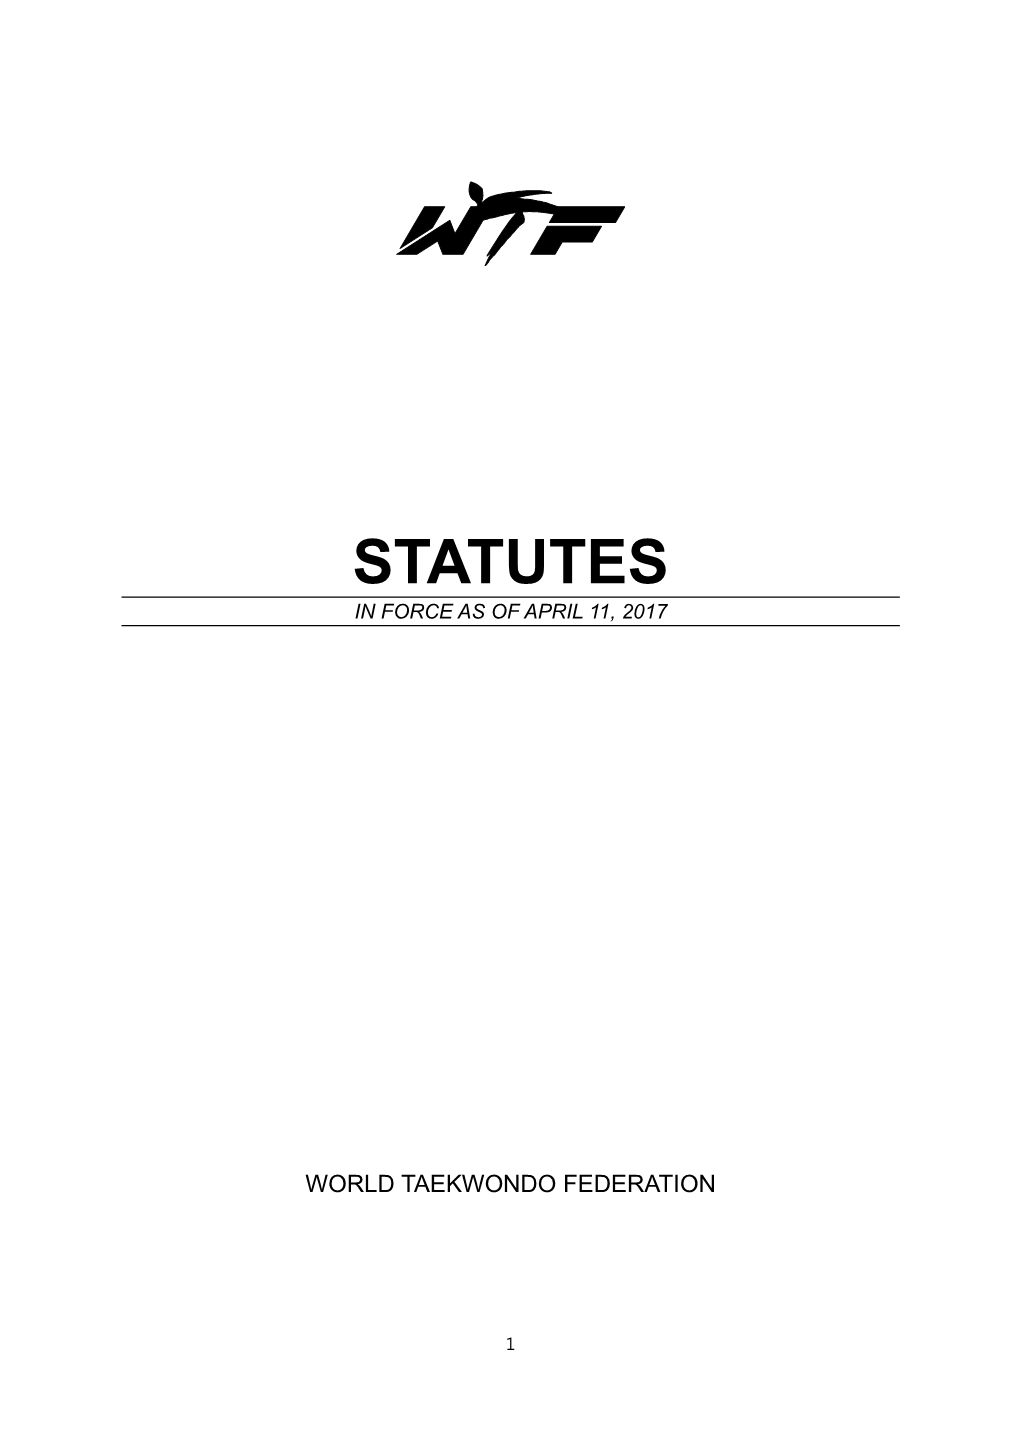 Statutes in Force As of April 11, 2017